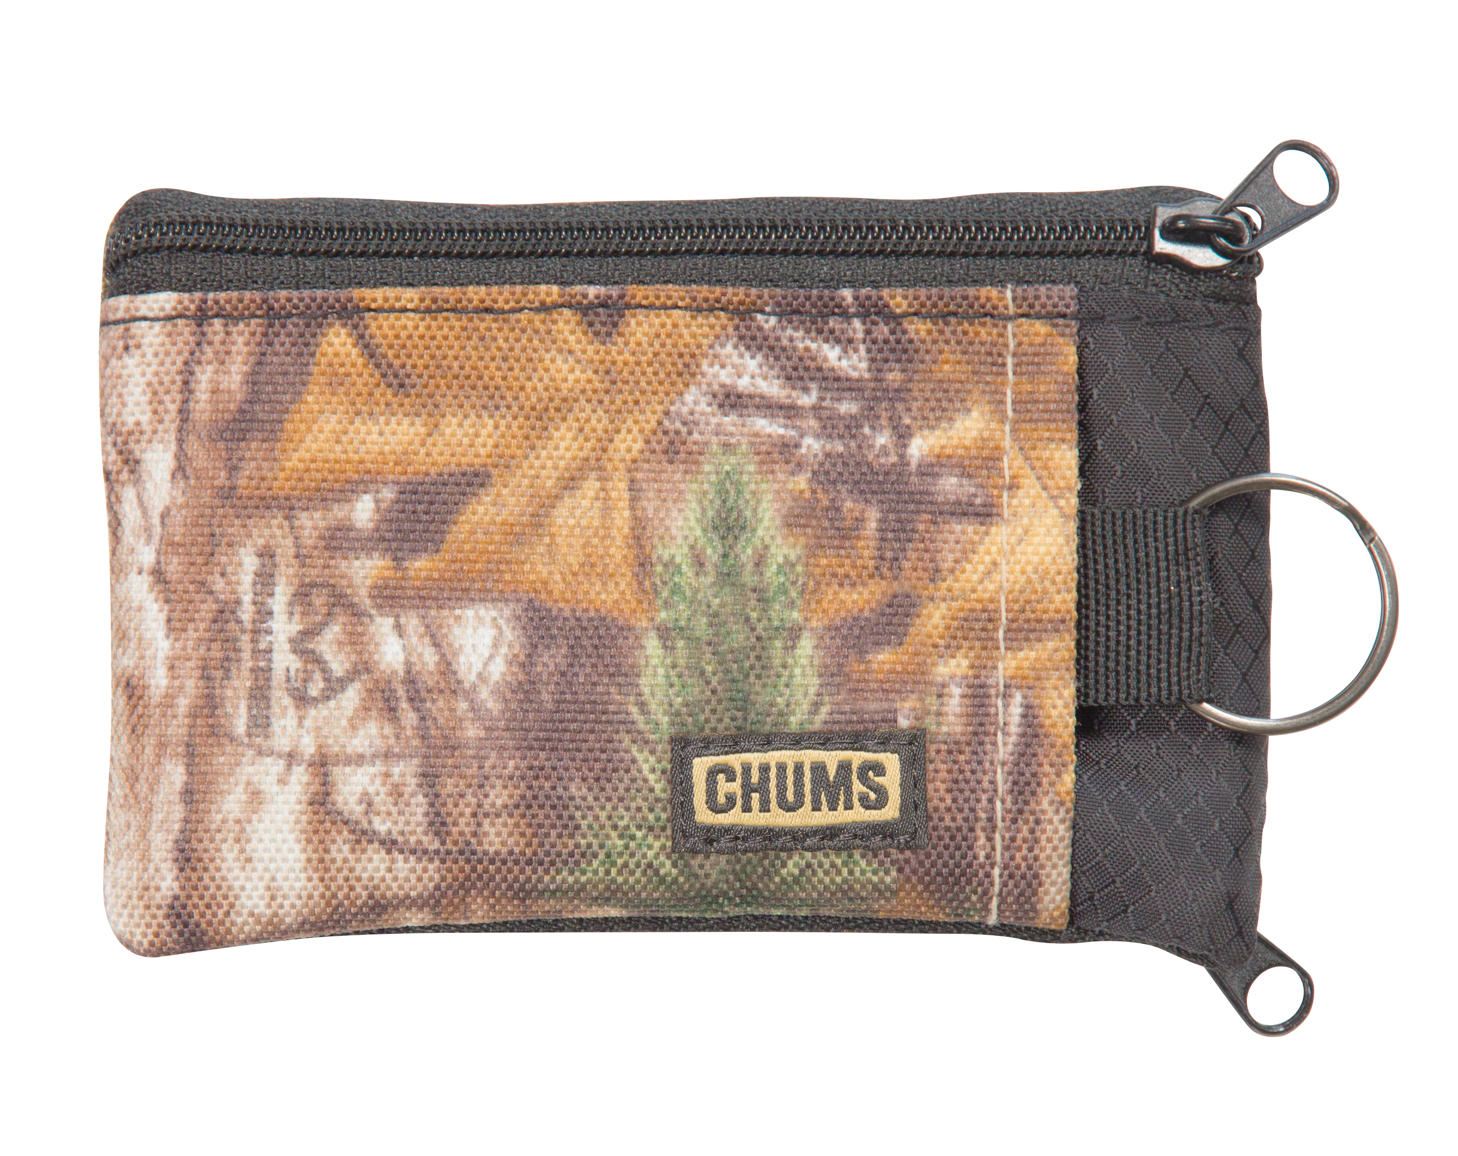 CHUMS Surfshorts Wallet in Realtree Xtra